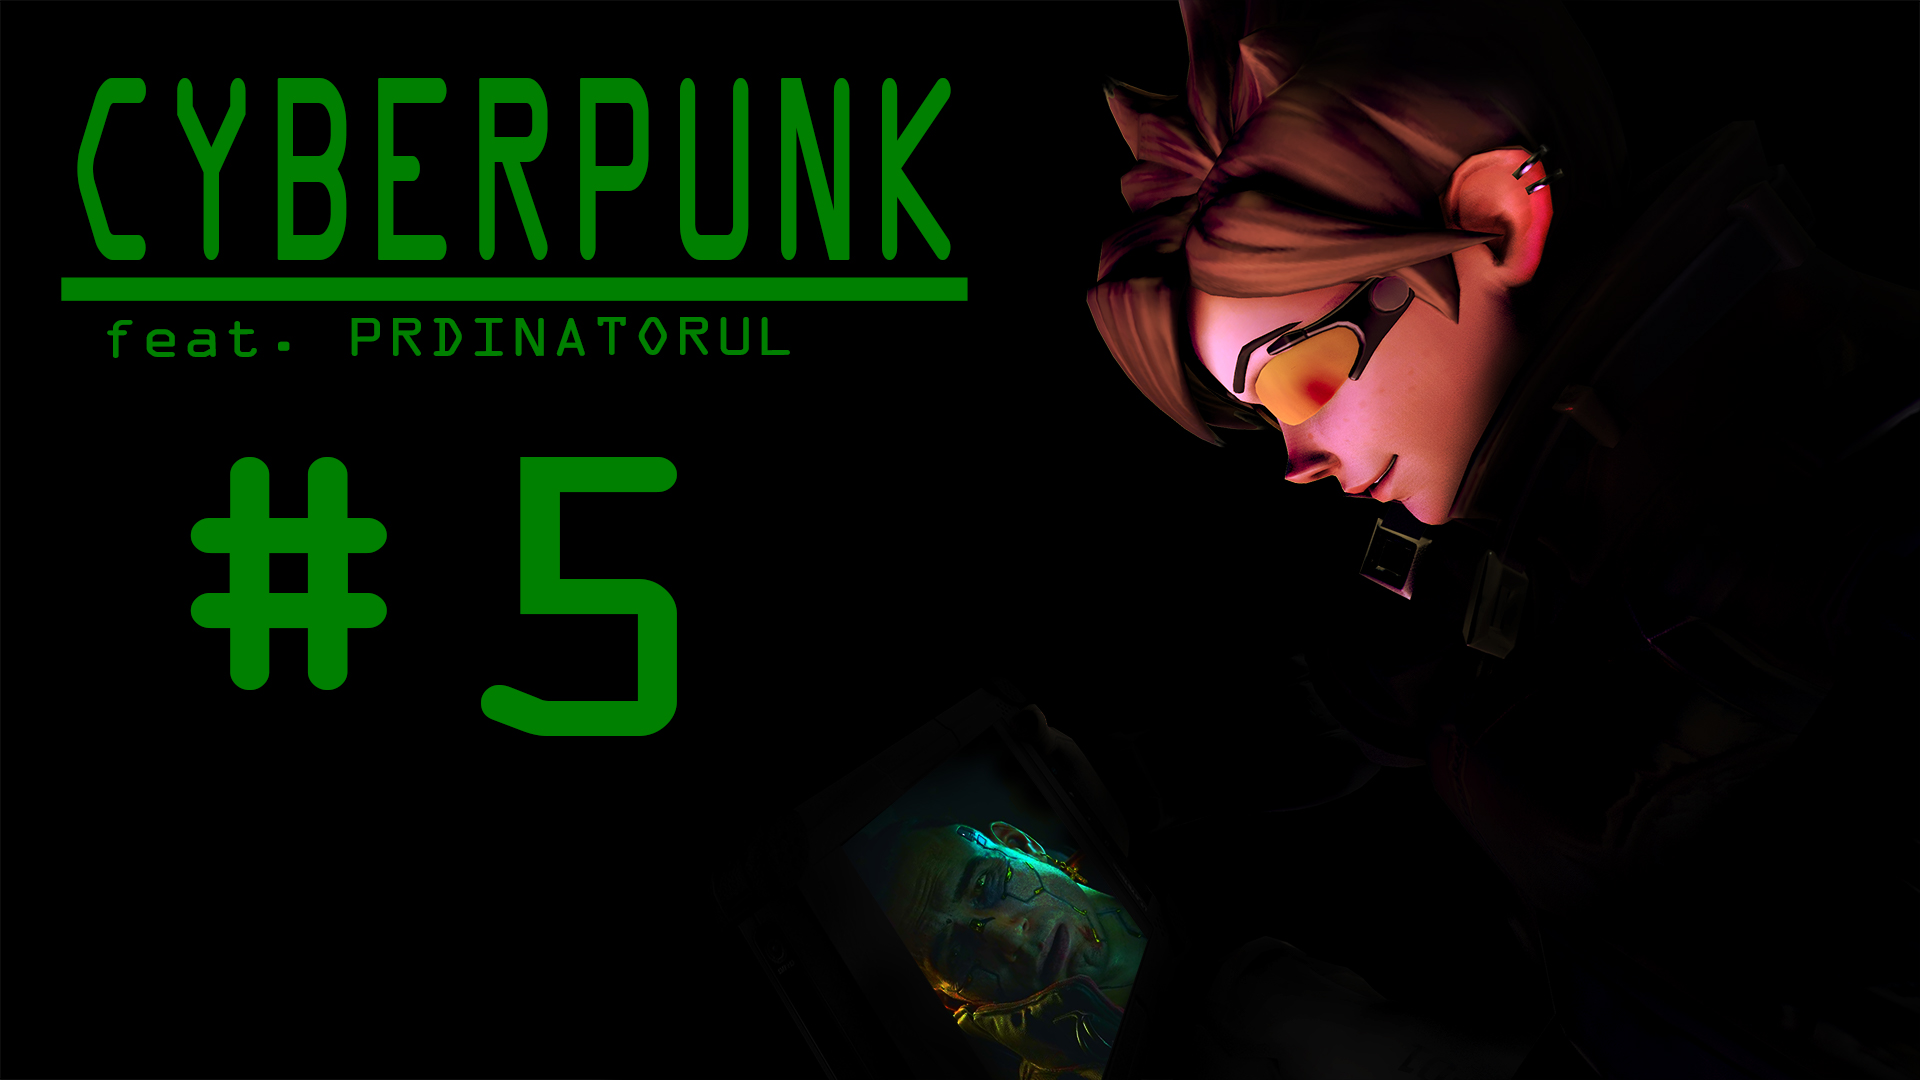 thumb_Cyberpunk_tracer5_special